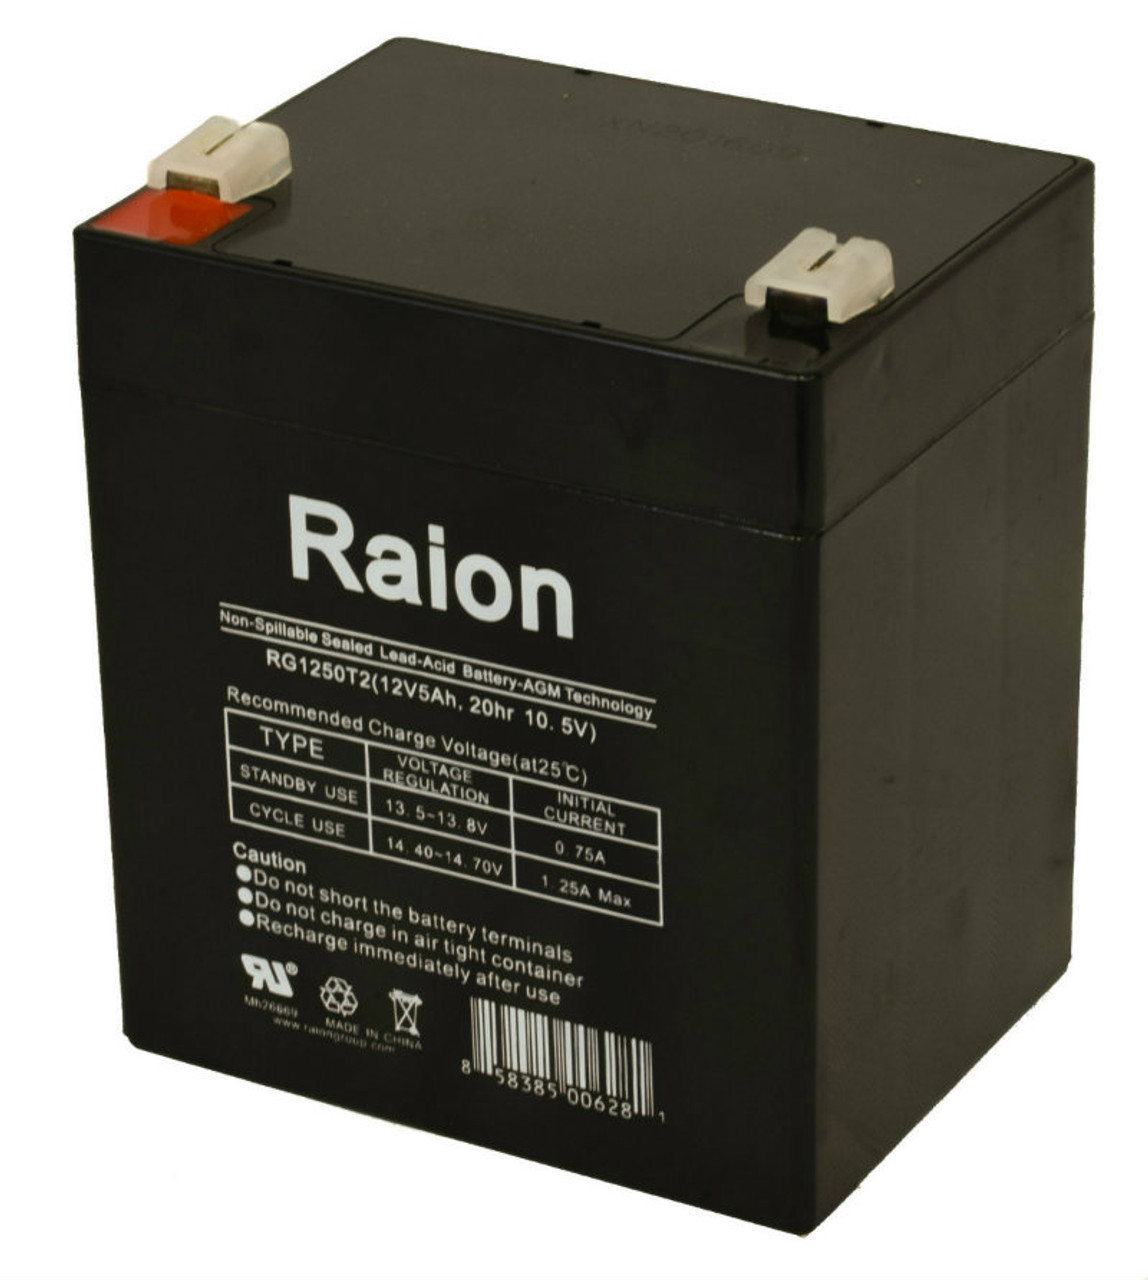 Raion Power RG1250T2 Replacement Battery for TOBBI 12V Kids Electric Ride on Toy Car with Remote Control